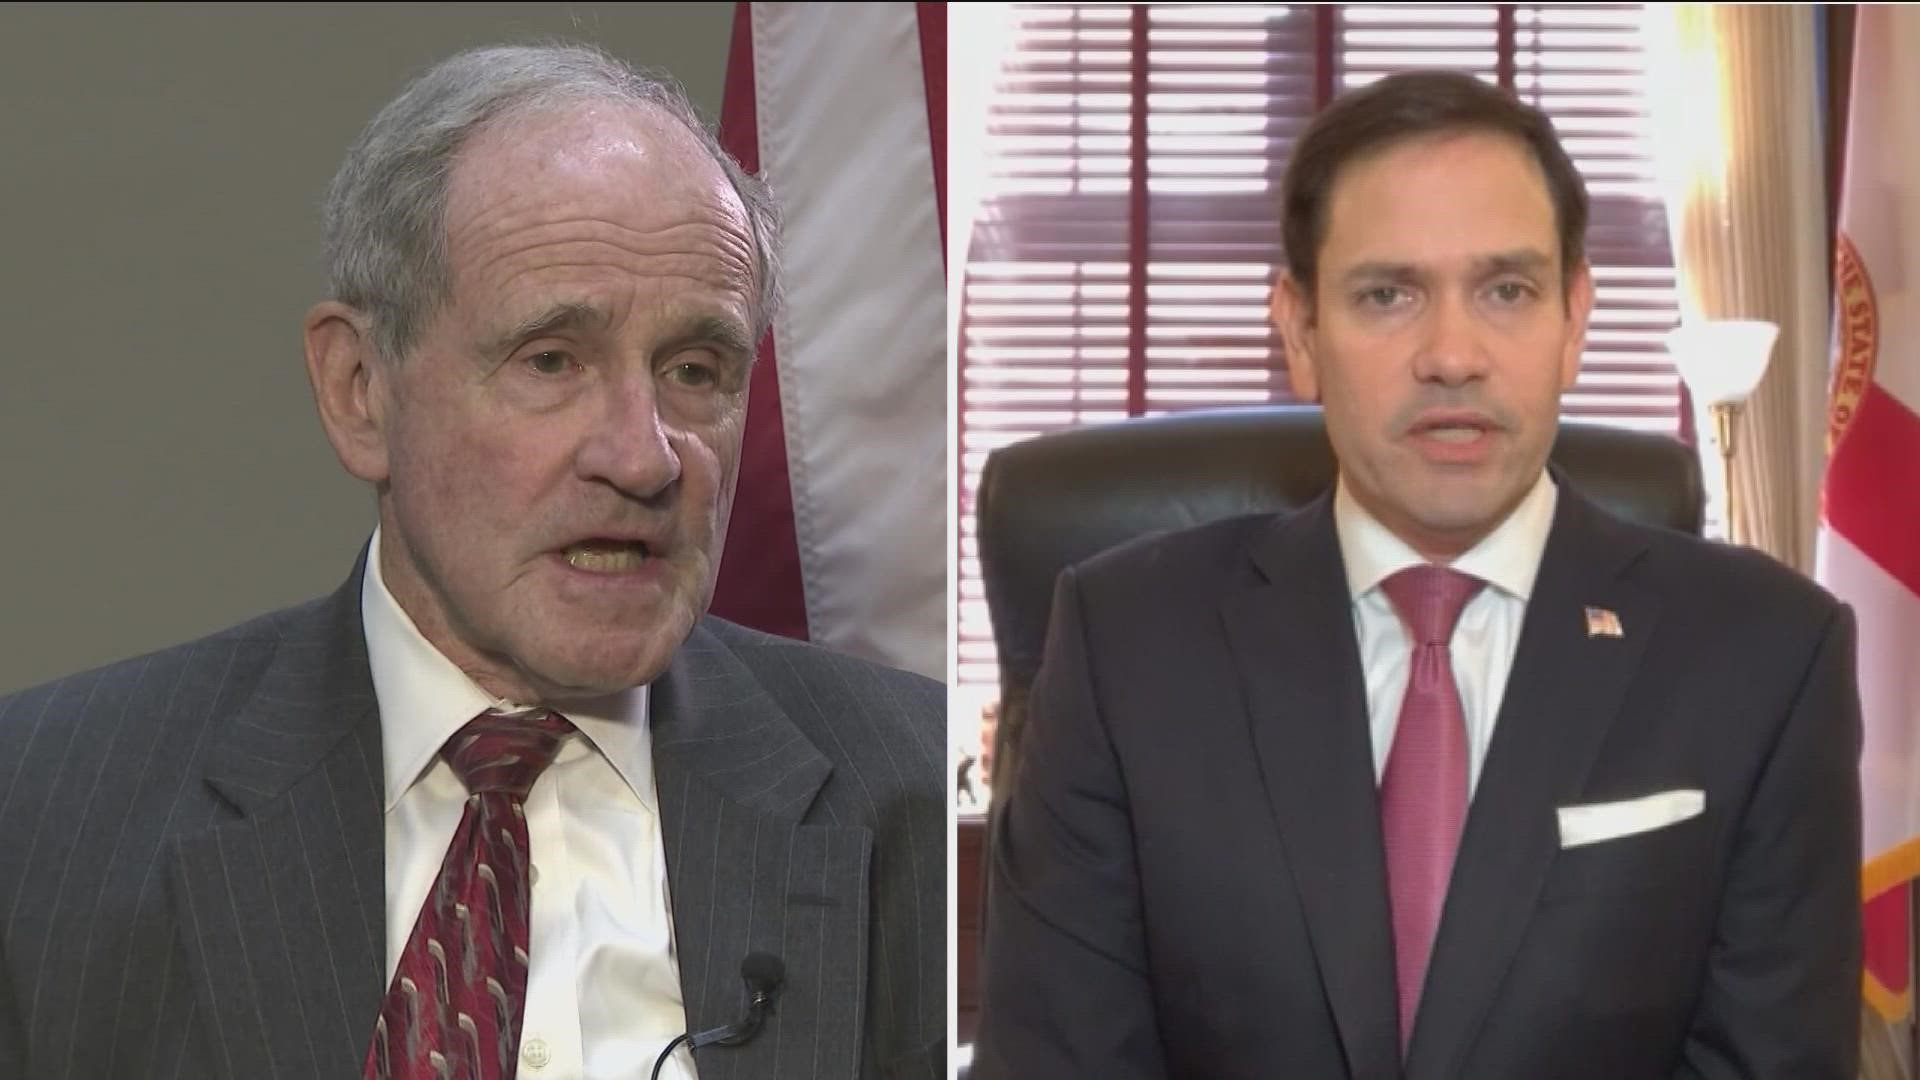 Risch, along with senator Marco Rubio and six other republican senators, introduced a bill to block abortion access on federal lands or facilities.